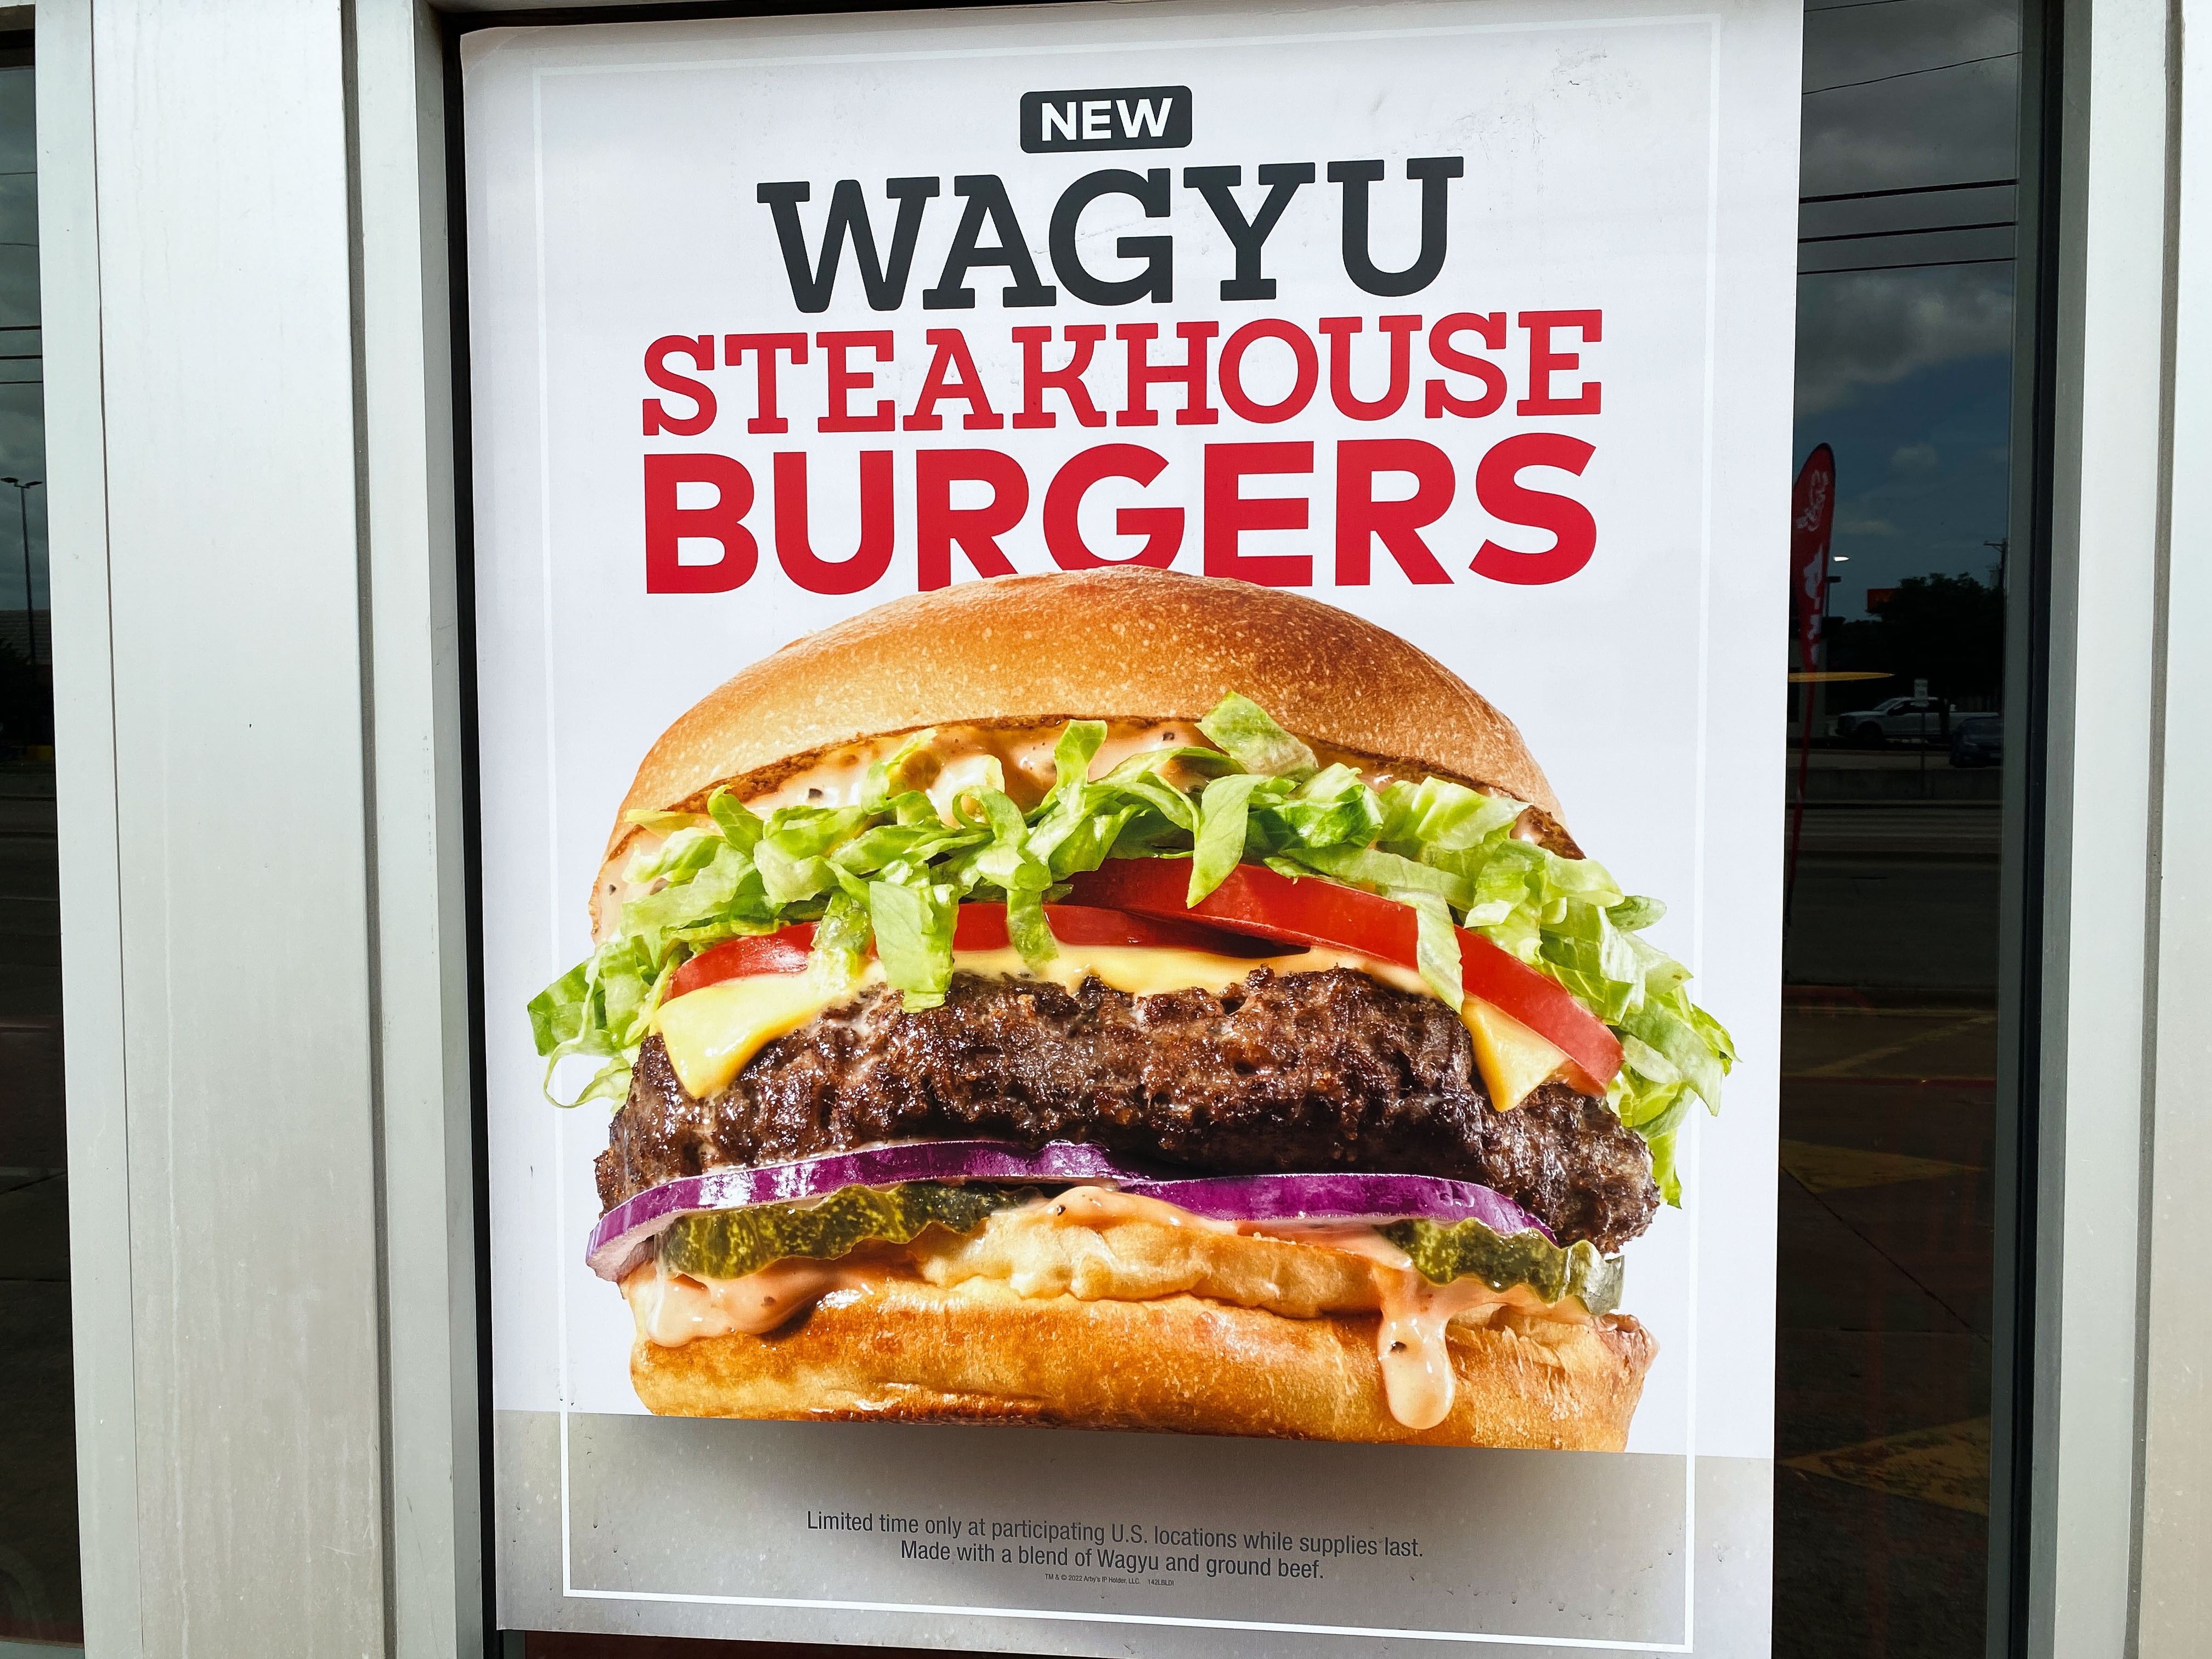 Arby's Deluxe Wagyu Steakhouse Burger What’s the Deal? Dallas Observer